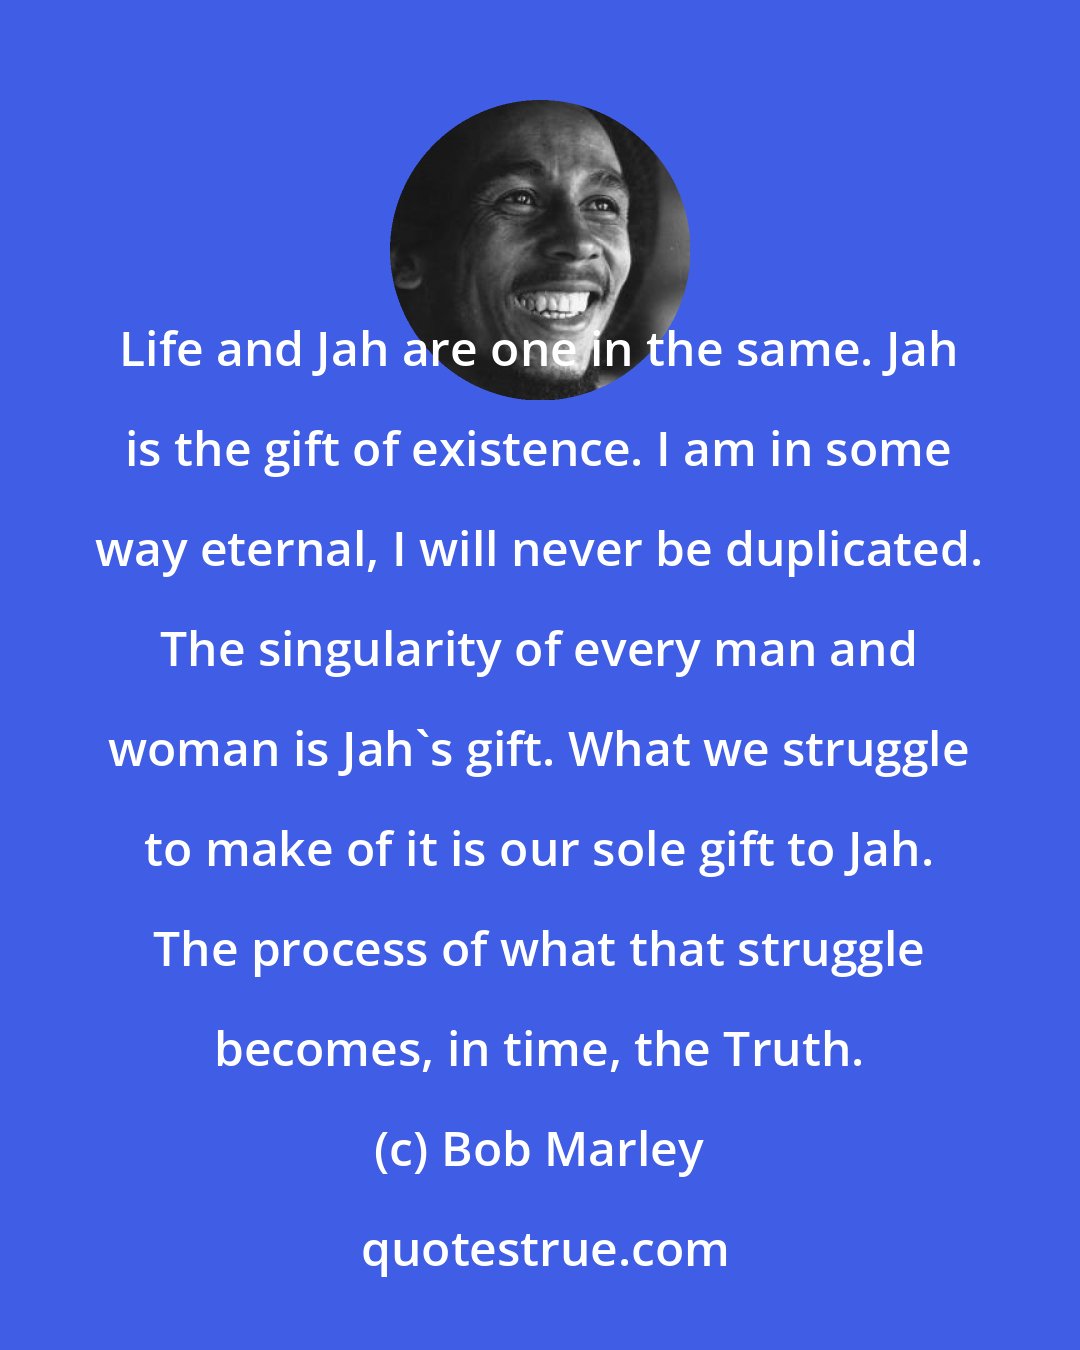 Bob Marley: Life and Jah are one in the same. Jah is the gift of existence. I am in some way eternal, I will never be duplicated. The singularity of every man and woman is Jah's gift. What we struggle to make of it is our sole gift to Jah. The process of what that struggle becomes, in time, the Truth.